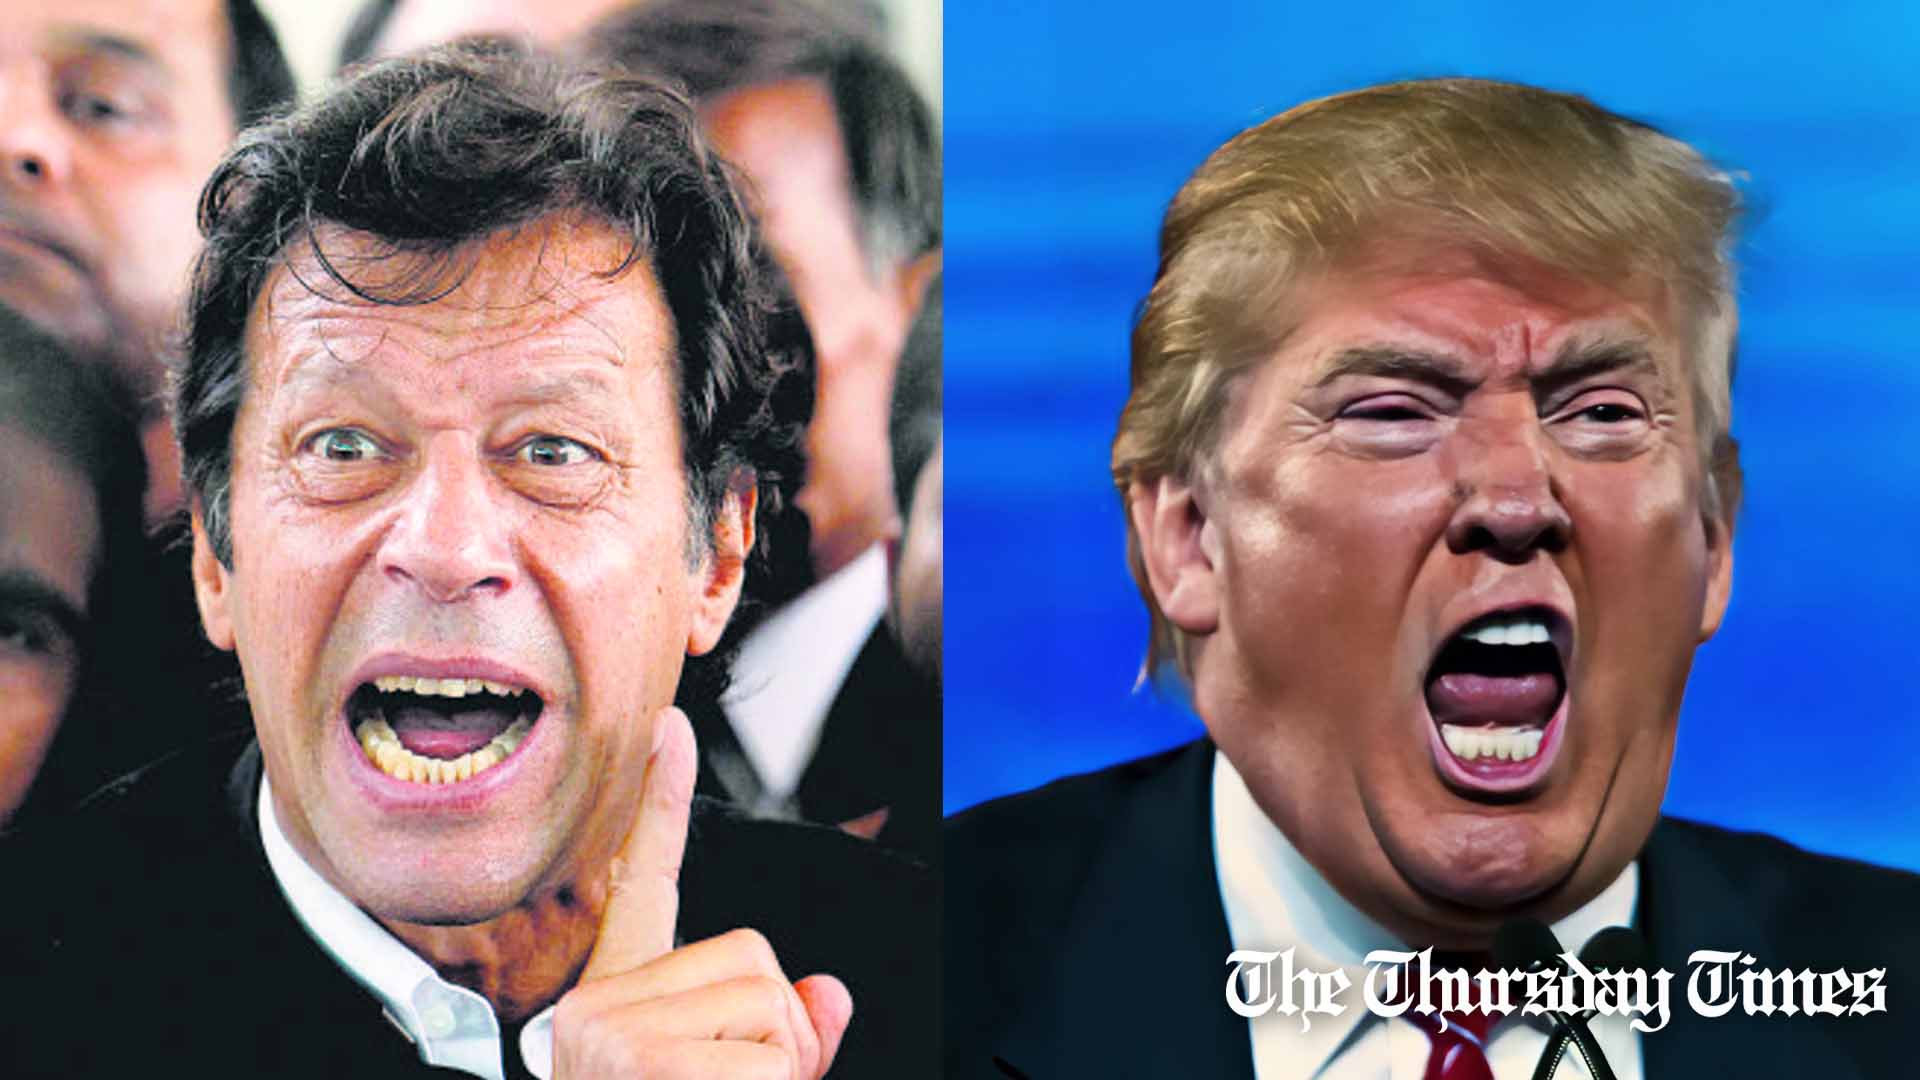 A combined file photo is shown of PTI chairman Imran Khan (L) and former U.S. president Donald Trump (R). — FILE/THE THURSDAY TIMES